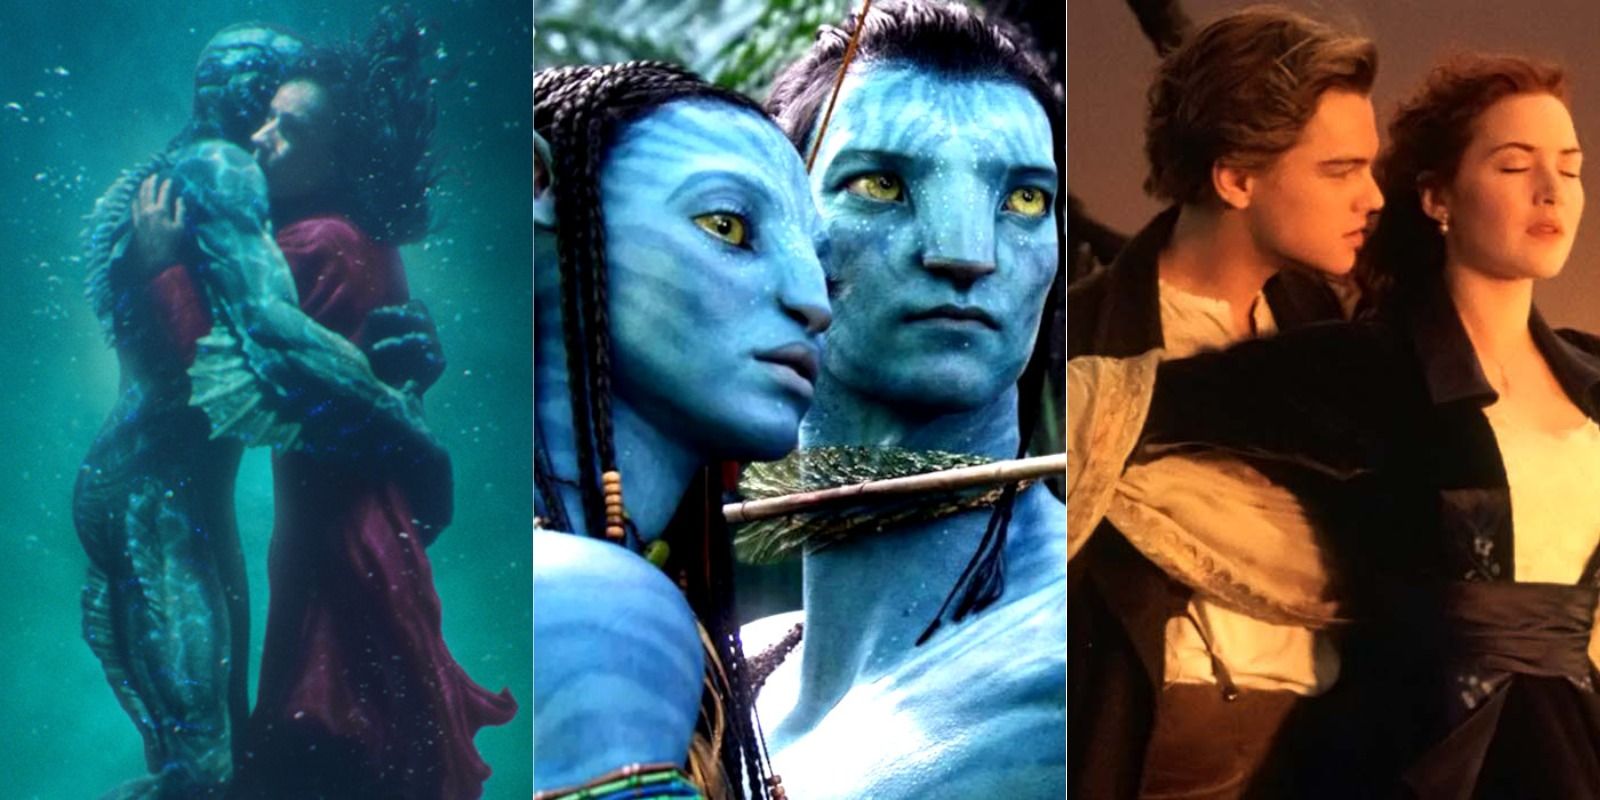 Avatar 2: 10 Best Movies To Watch While You Wait For Its Release